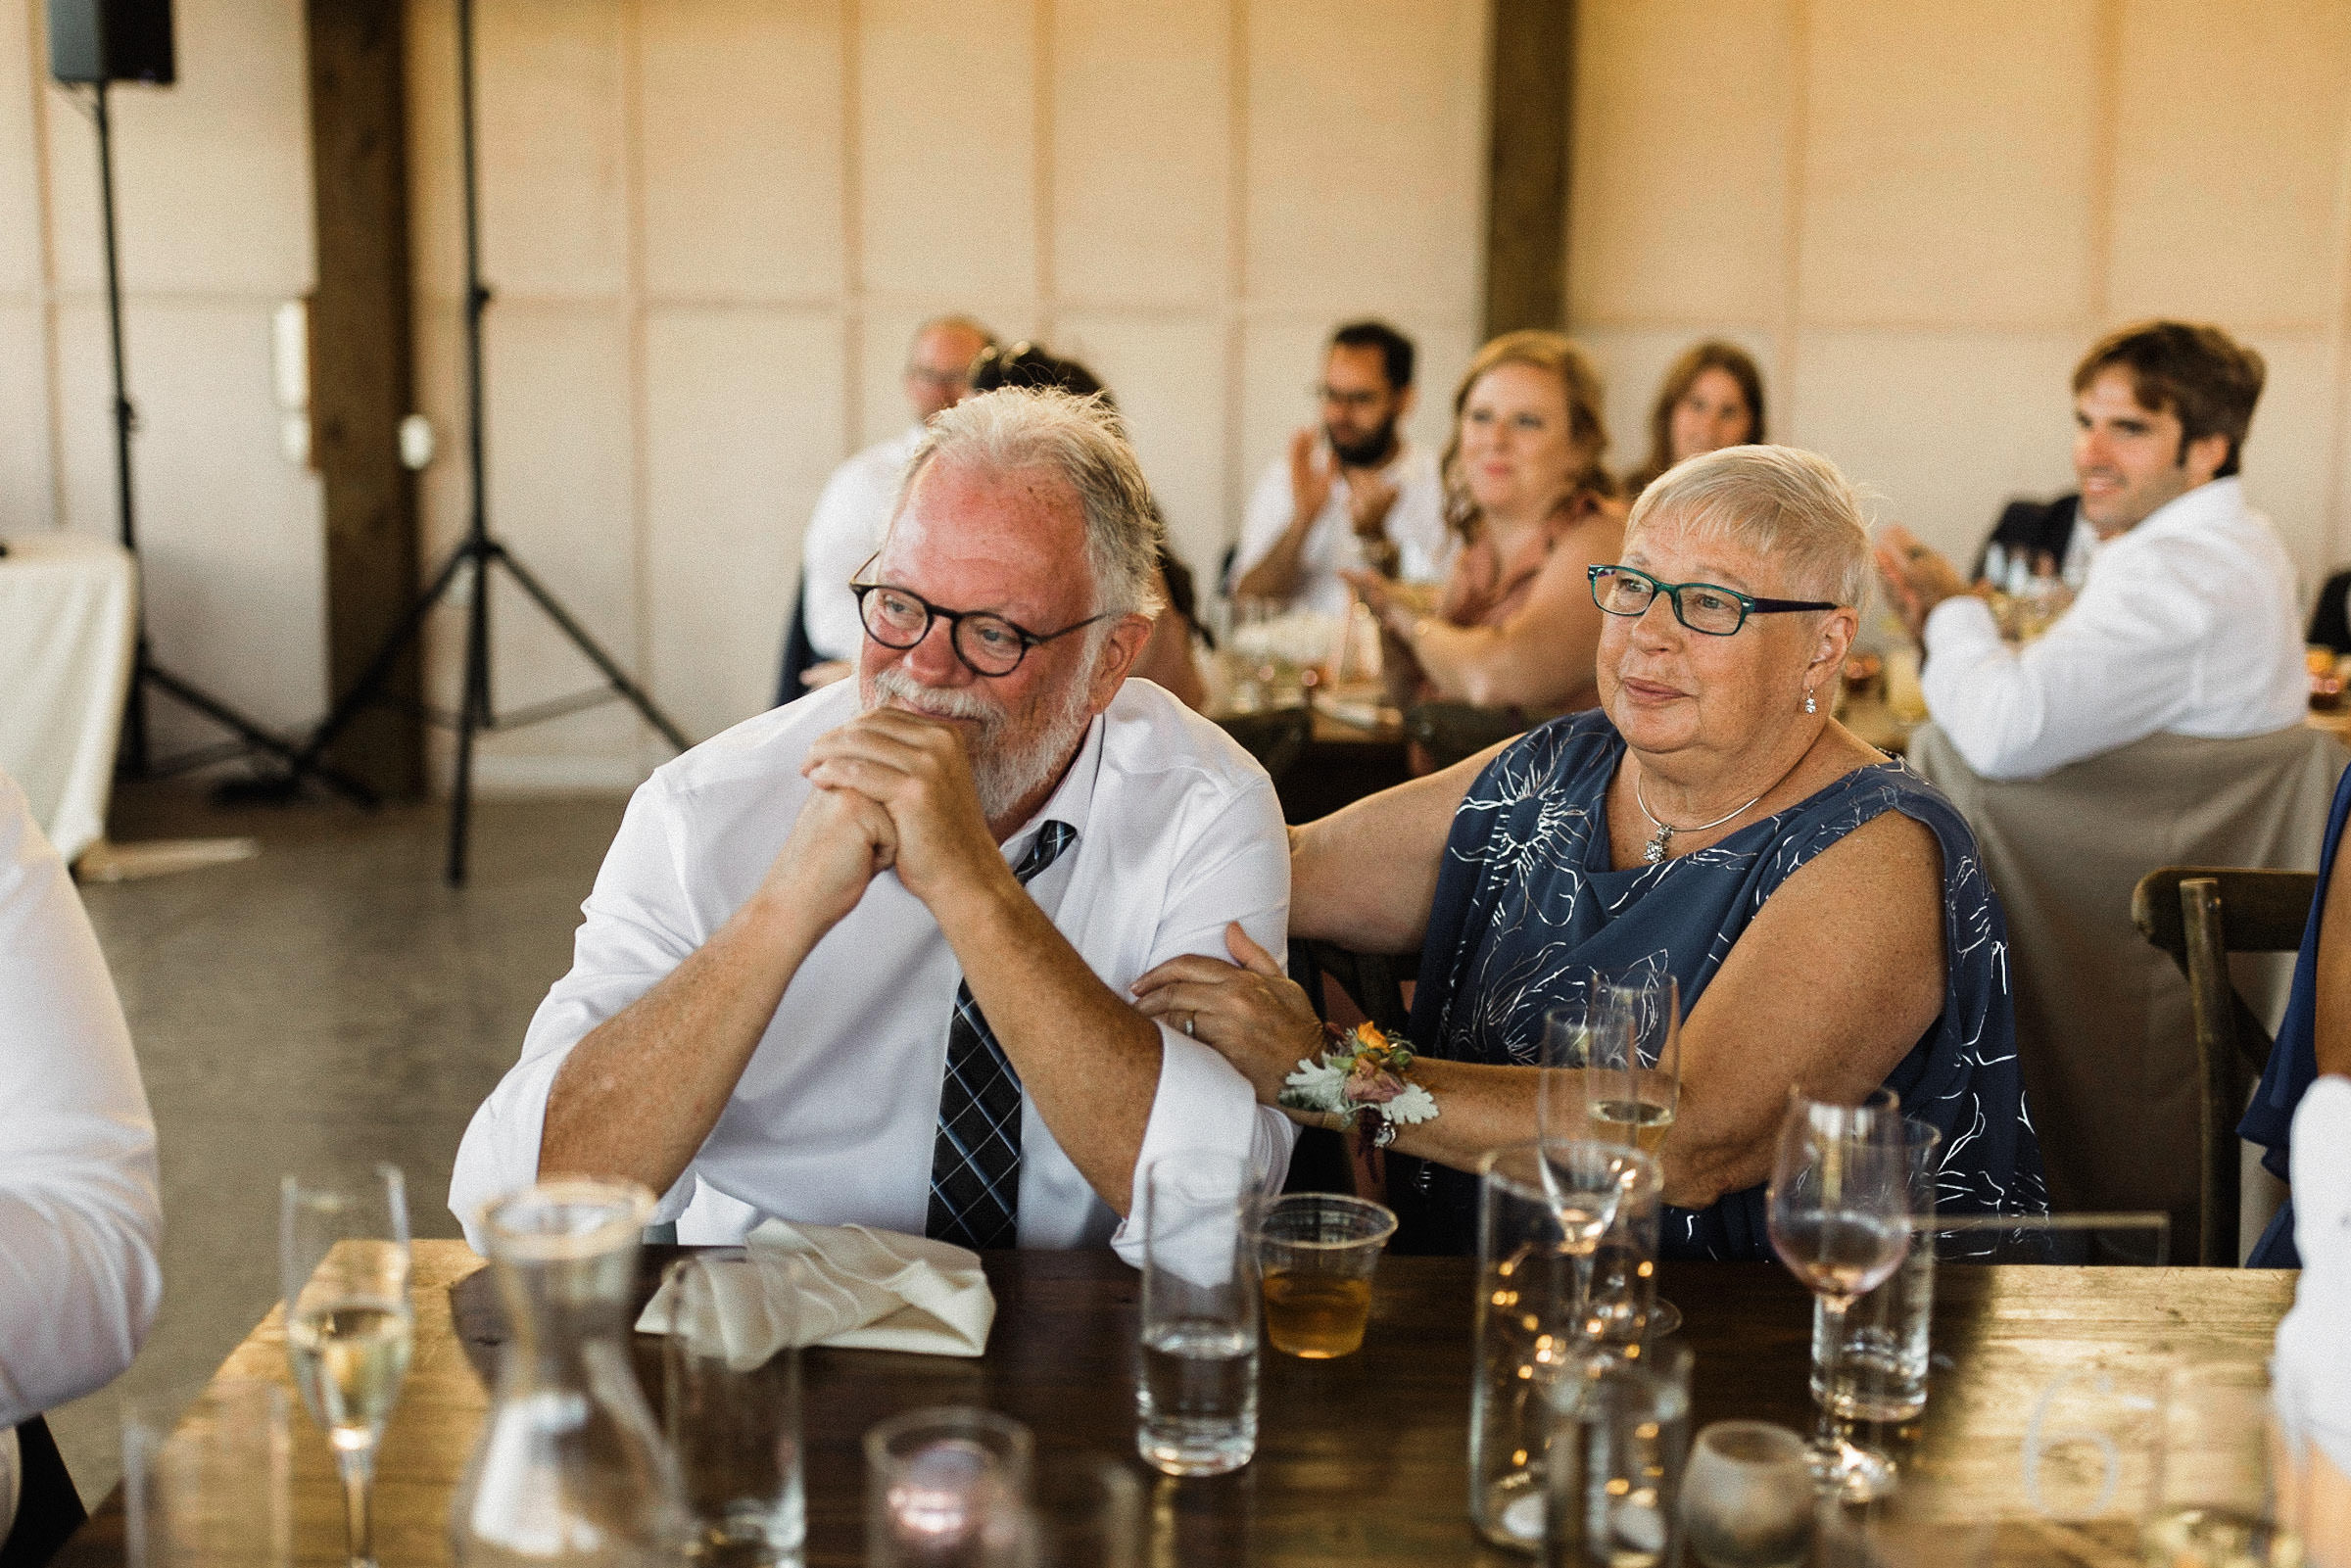 Groom's mother and father react emotionally to a toast